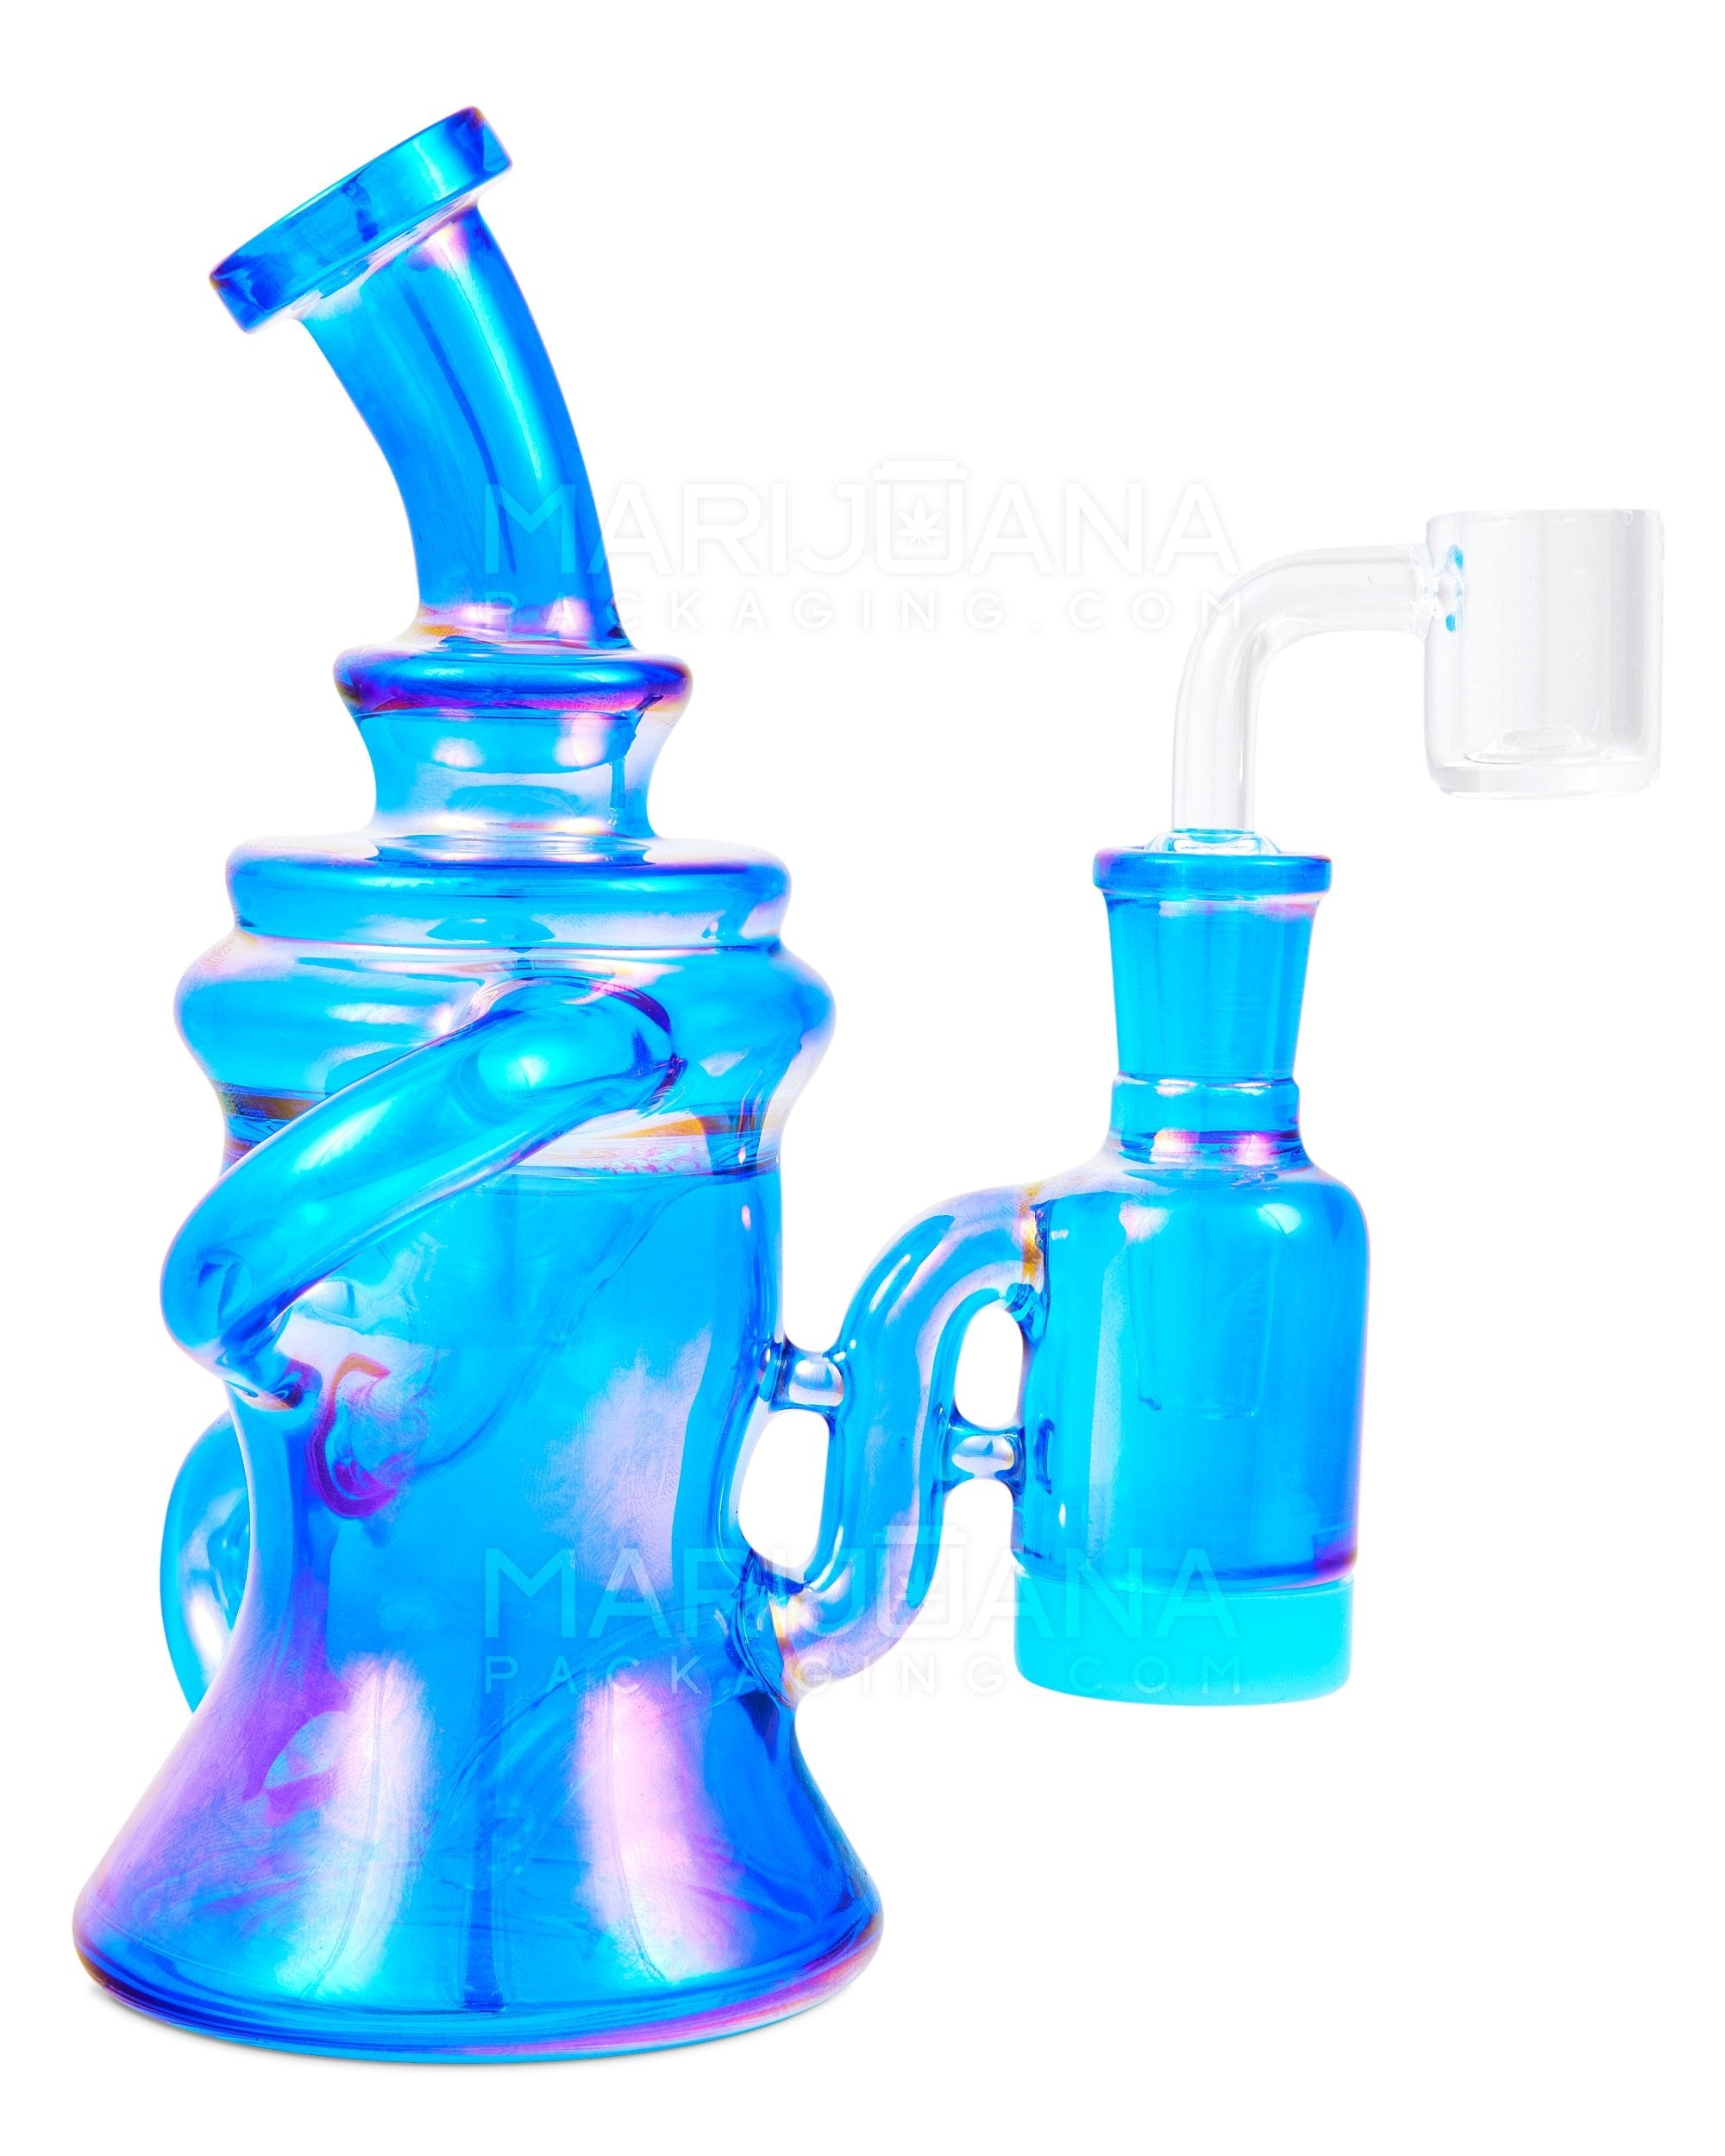 Bent Neck Iridescent Recycler Glass Dab Rig w/ Silicone Claim Catcher | 7in Tall - 14mm Banger - Blue - 2